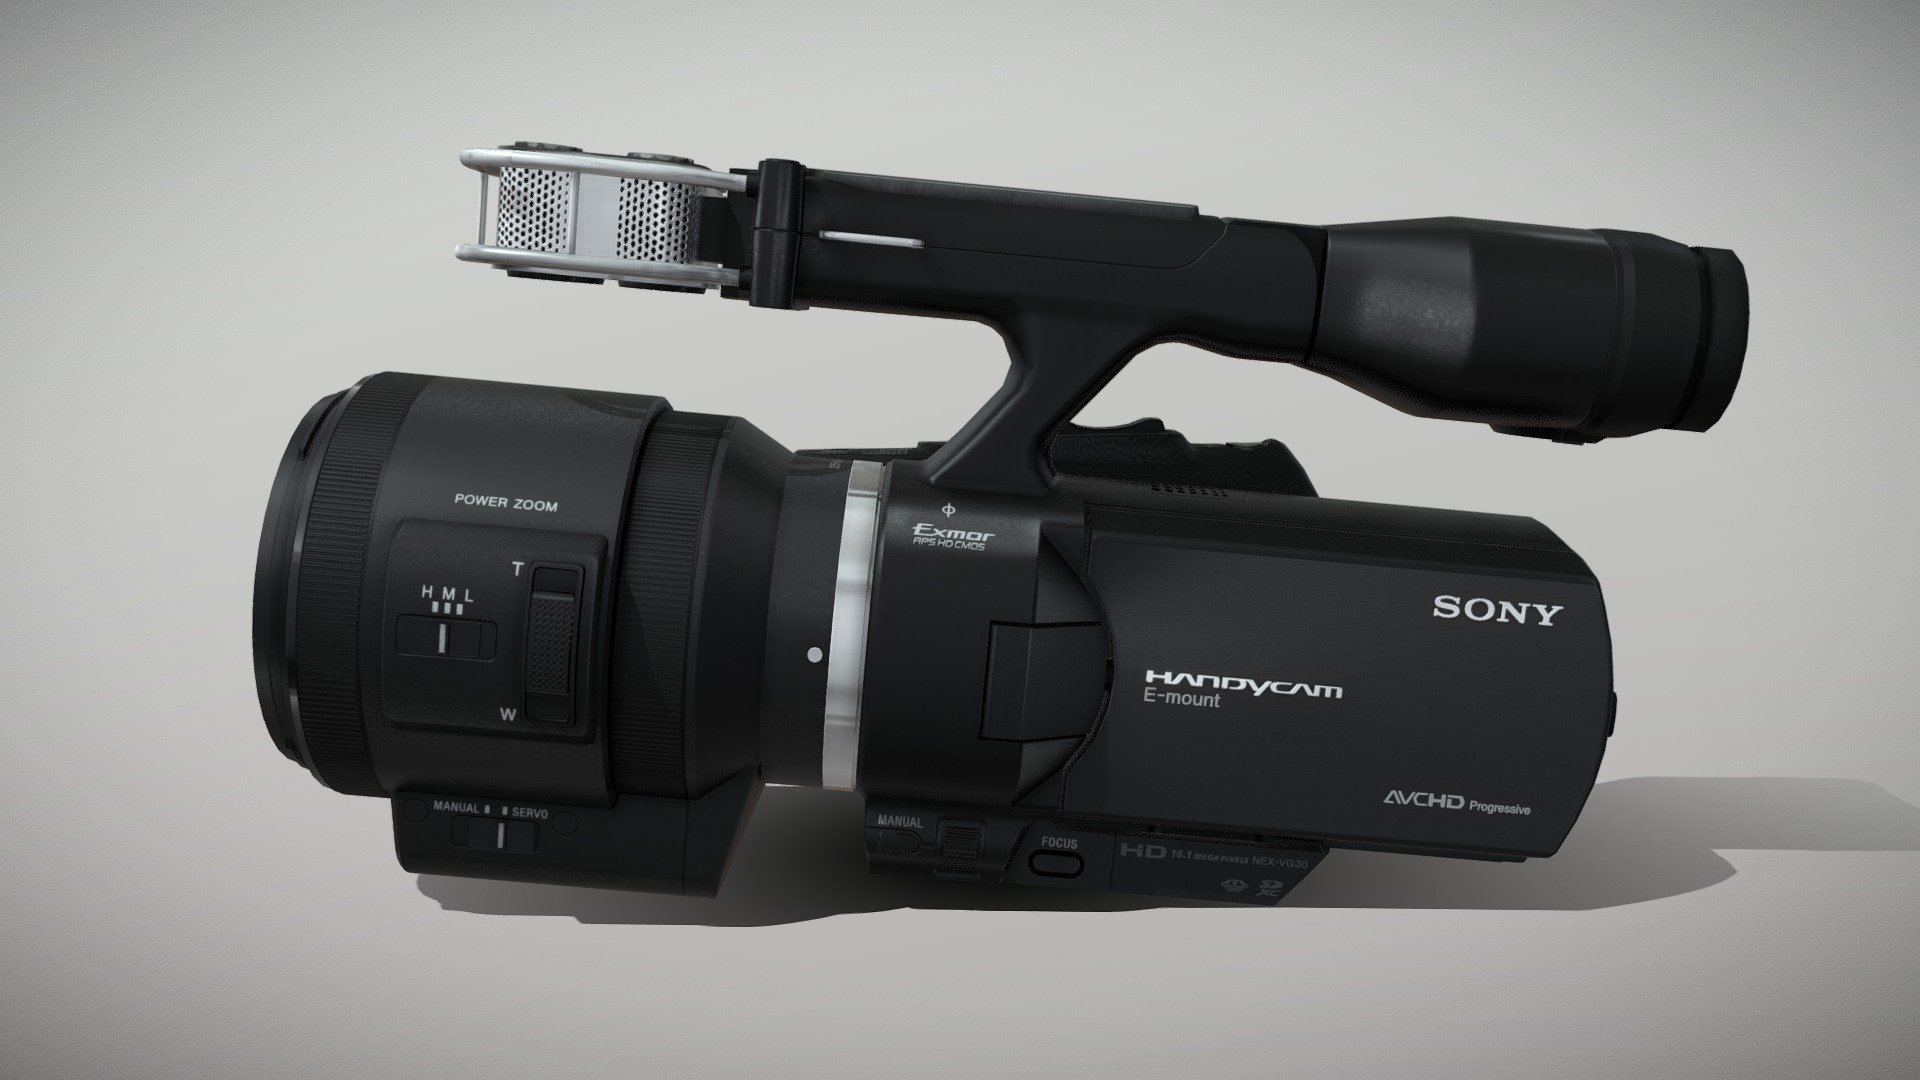 •   Let me present to you high-quality low-poly 3D model Sony Nex-VG30EH Camcorder with 18-200mm f/3.5-6.3 Power Zoom Lens. This model can be used in various fields 3D Graphics such as game development, advertising, interior design, motion picture art, visualization, etc..

•    The model consists of a few meshes, it is low-polygonal and it has four materials (for Body, Lens body, Strap and Glass of Lens).

•   The total of the main textures is 11. Resolution of all textures is 4096 pixels square aspect ratio in .png format. Also there is original texture file .PSD format in separate archive.

•   Polygon count of model is – 9339.

•   The model has correct dimensions in real-world scale. All parts grouped and named correctly.

•   To use the model in other 3D programs there are scenes saved in formats .fbx, .obj, .DAE, .max (2010 version).

Note: If you see some artifacts on textures, then it compression works in the viewer. We recommend setting HD quality for textures. But anyway, original textures have no artifacts 3d model